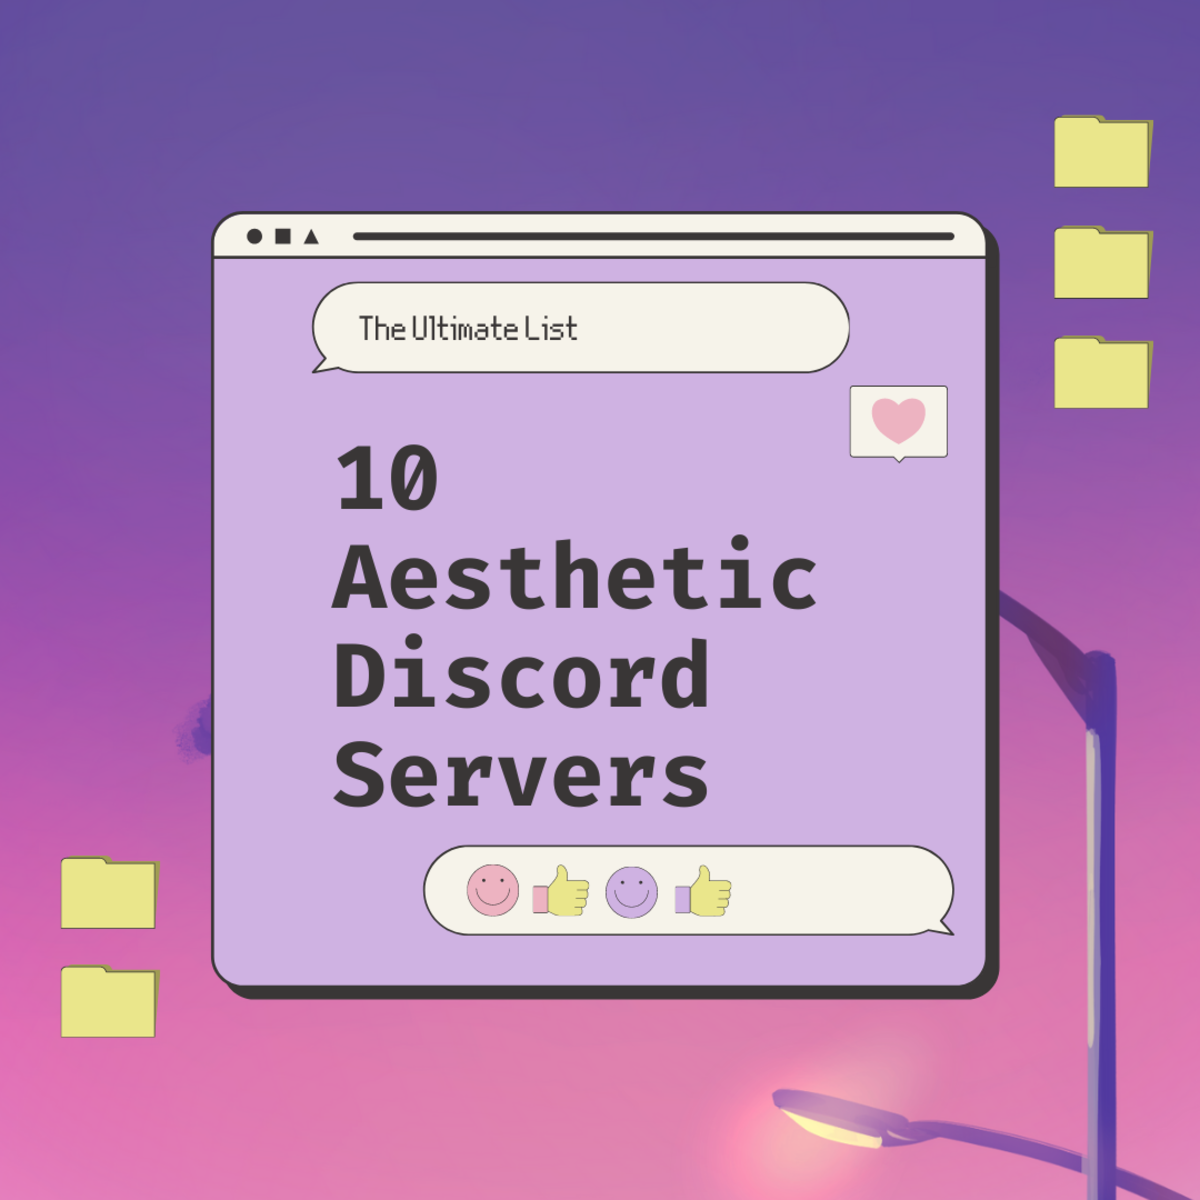 10 Aesthetic Discord Servers to Check Out: The Ultimate List